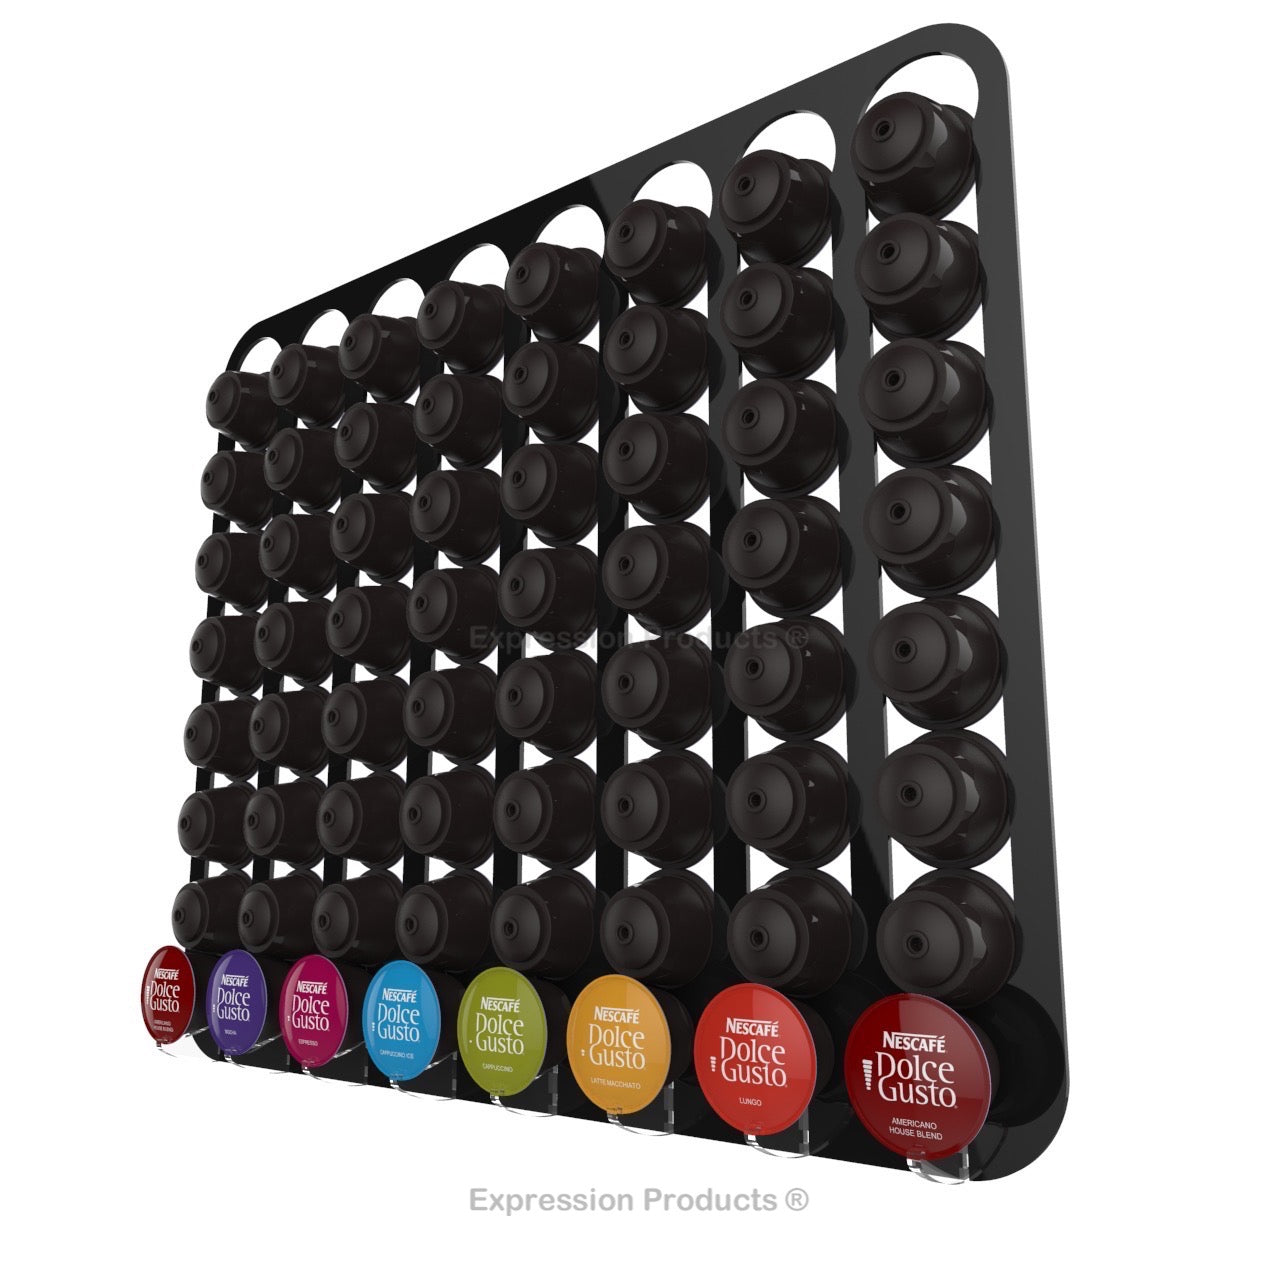 Dolce Gusto Coffee Pod Holder, Wall Mounted.  Shown in Black Holding 64 Pods